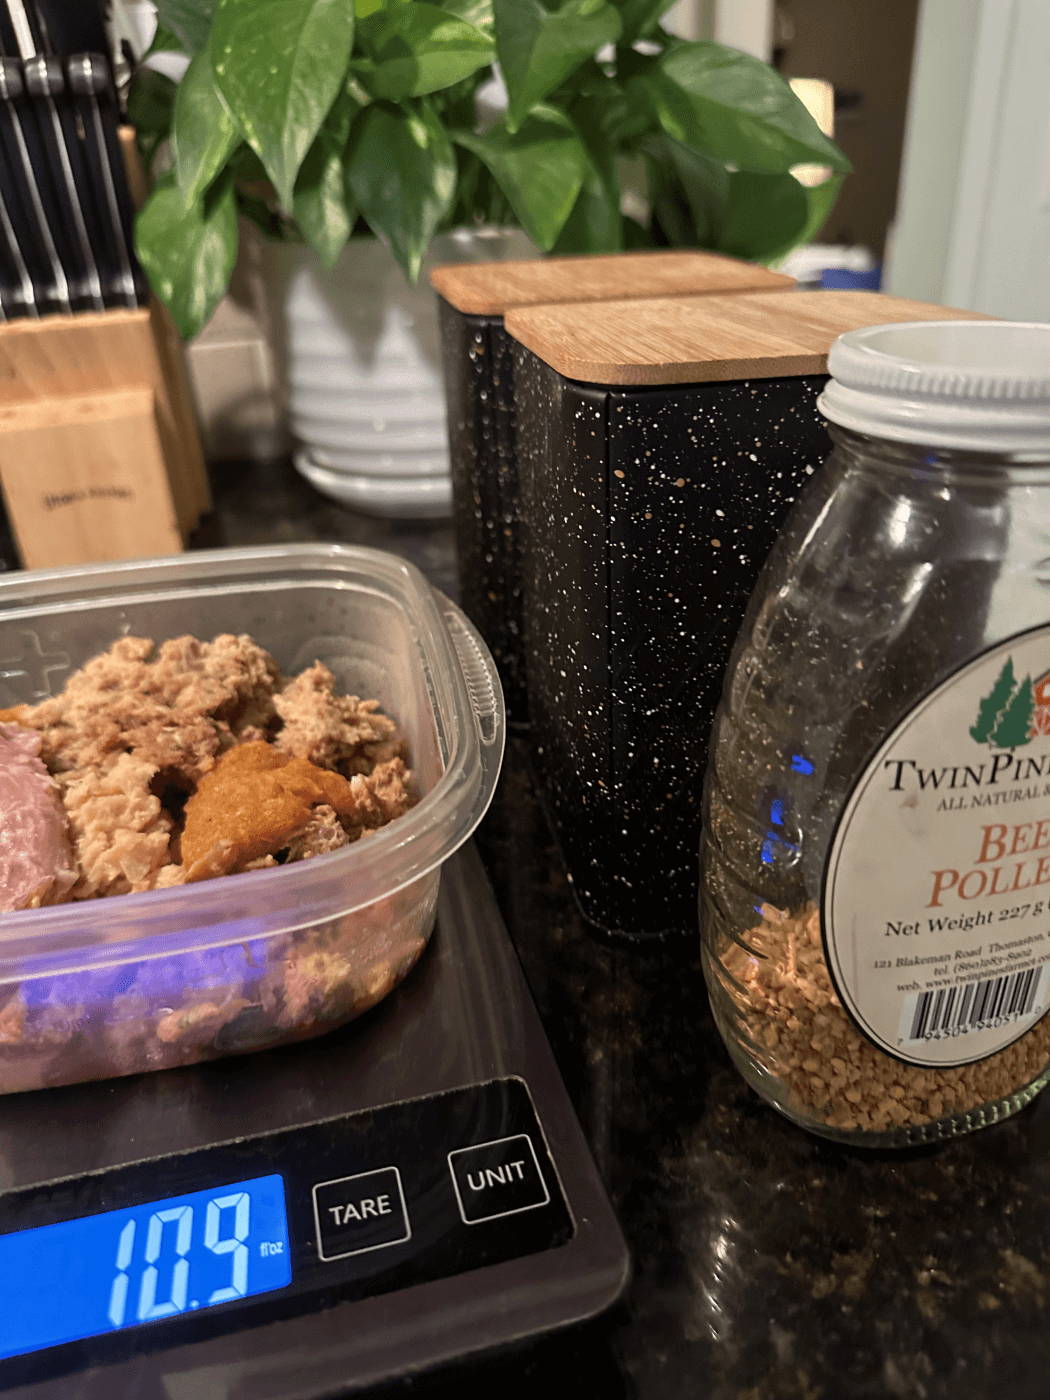 Raw meat in Tupperware on kitchen scale next to bee pollen.